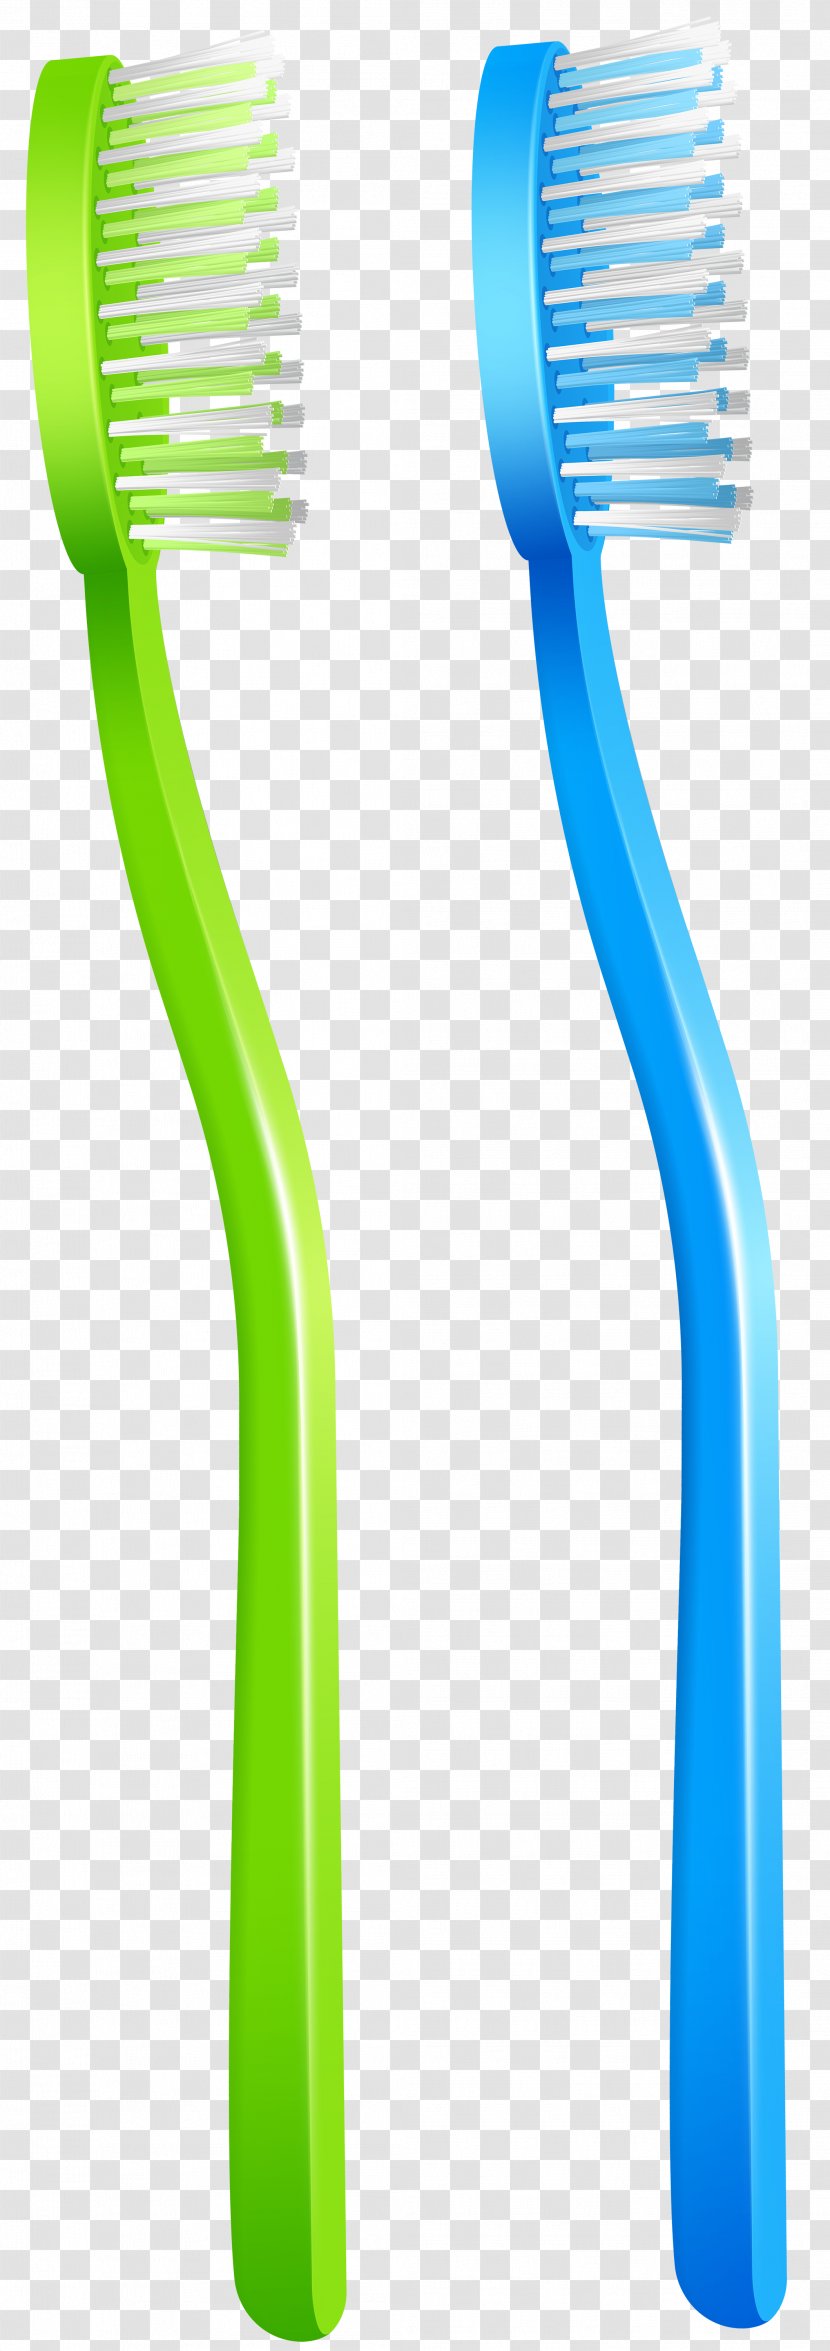 Electric Toothbrush Clip Art - Accessory - Toothbrash Transparent PNG